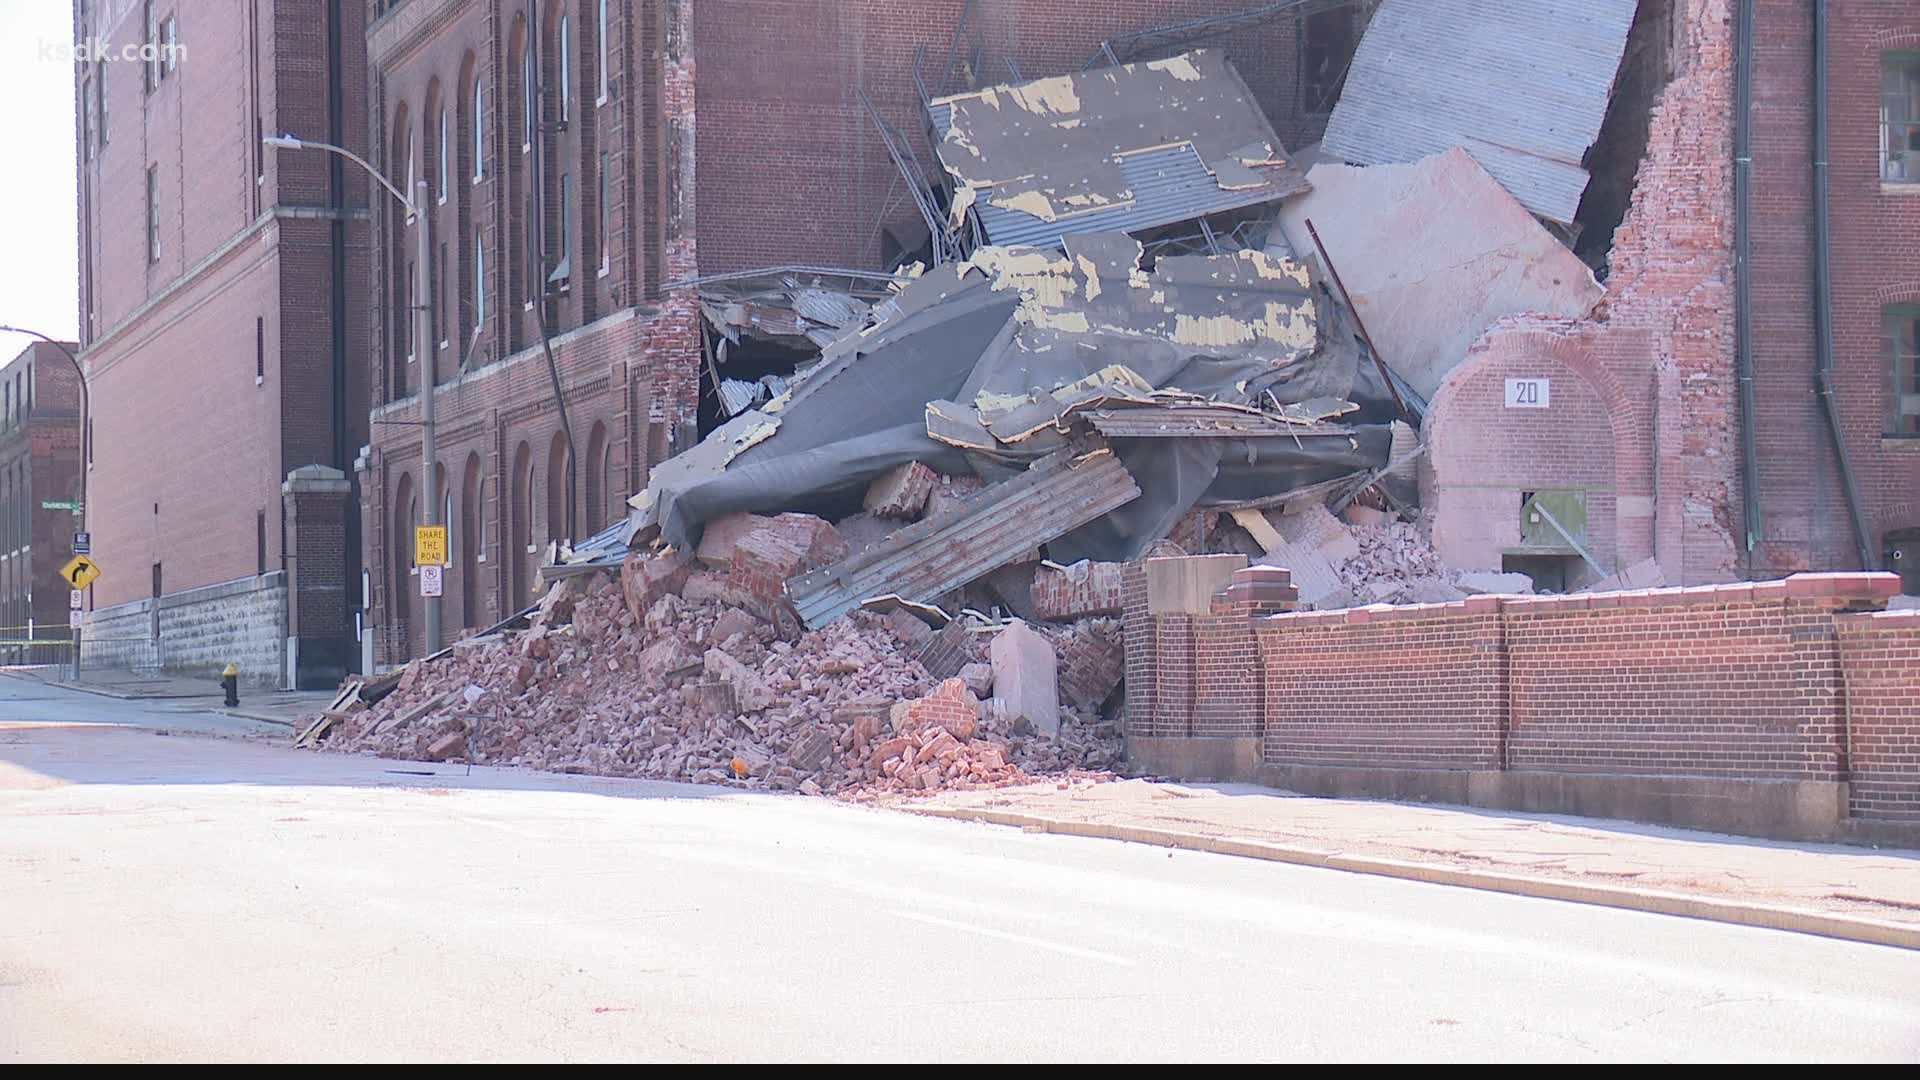 Crews are still working to clean up part of a historic building that collapsed